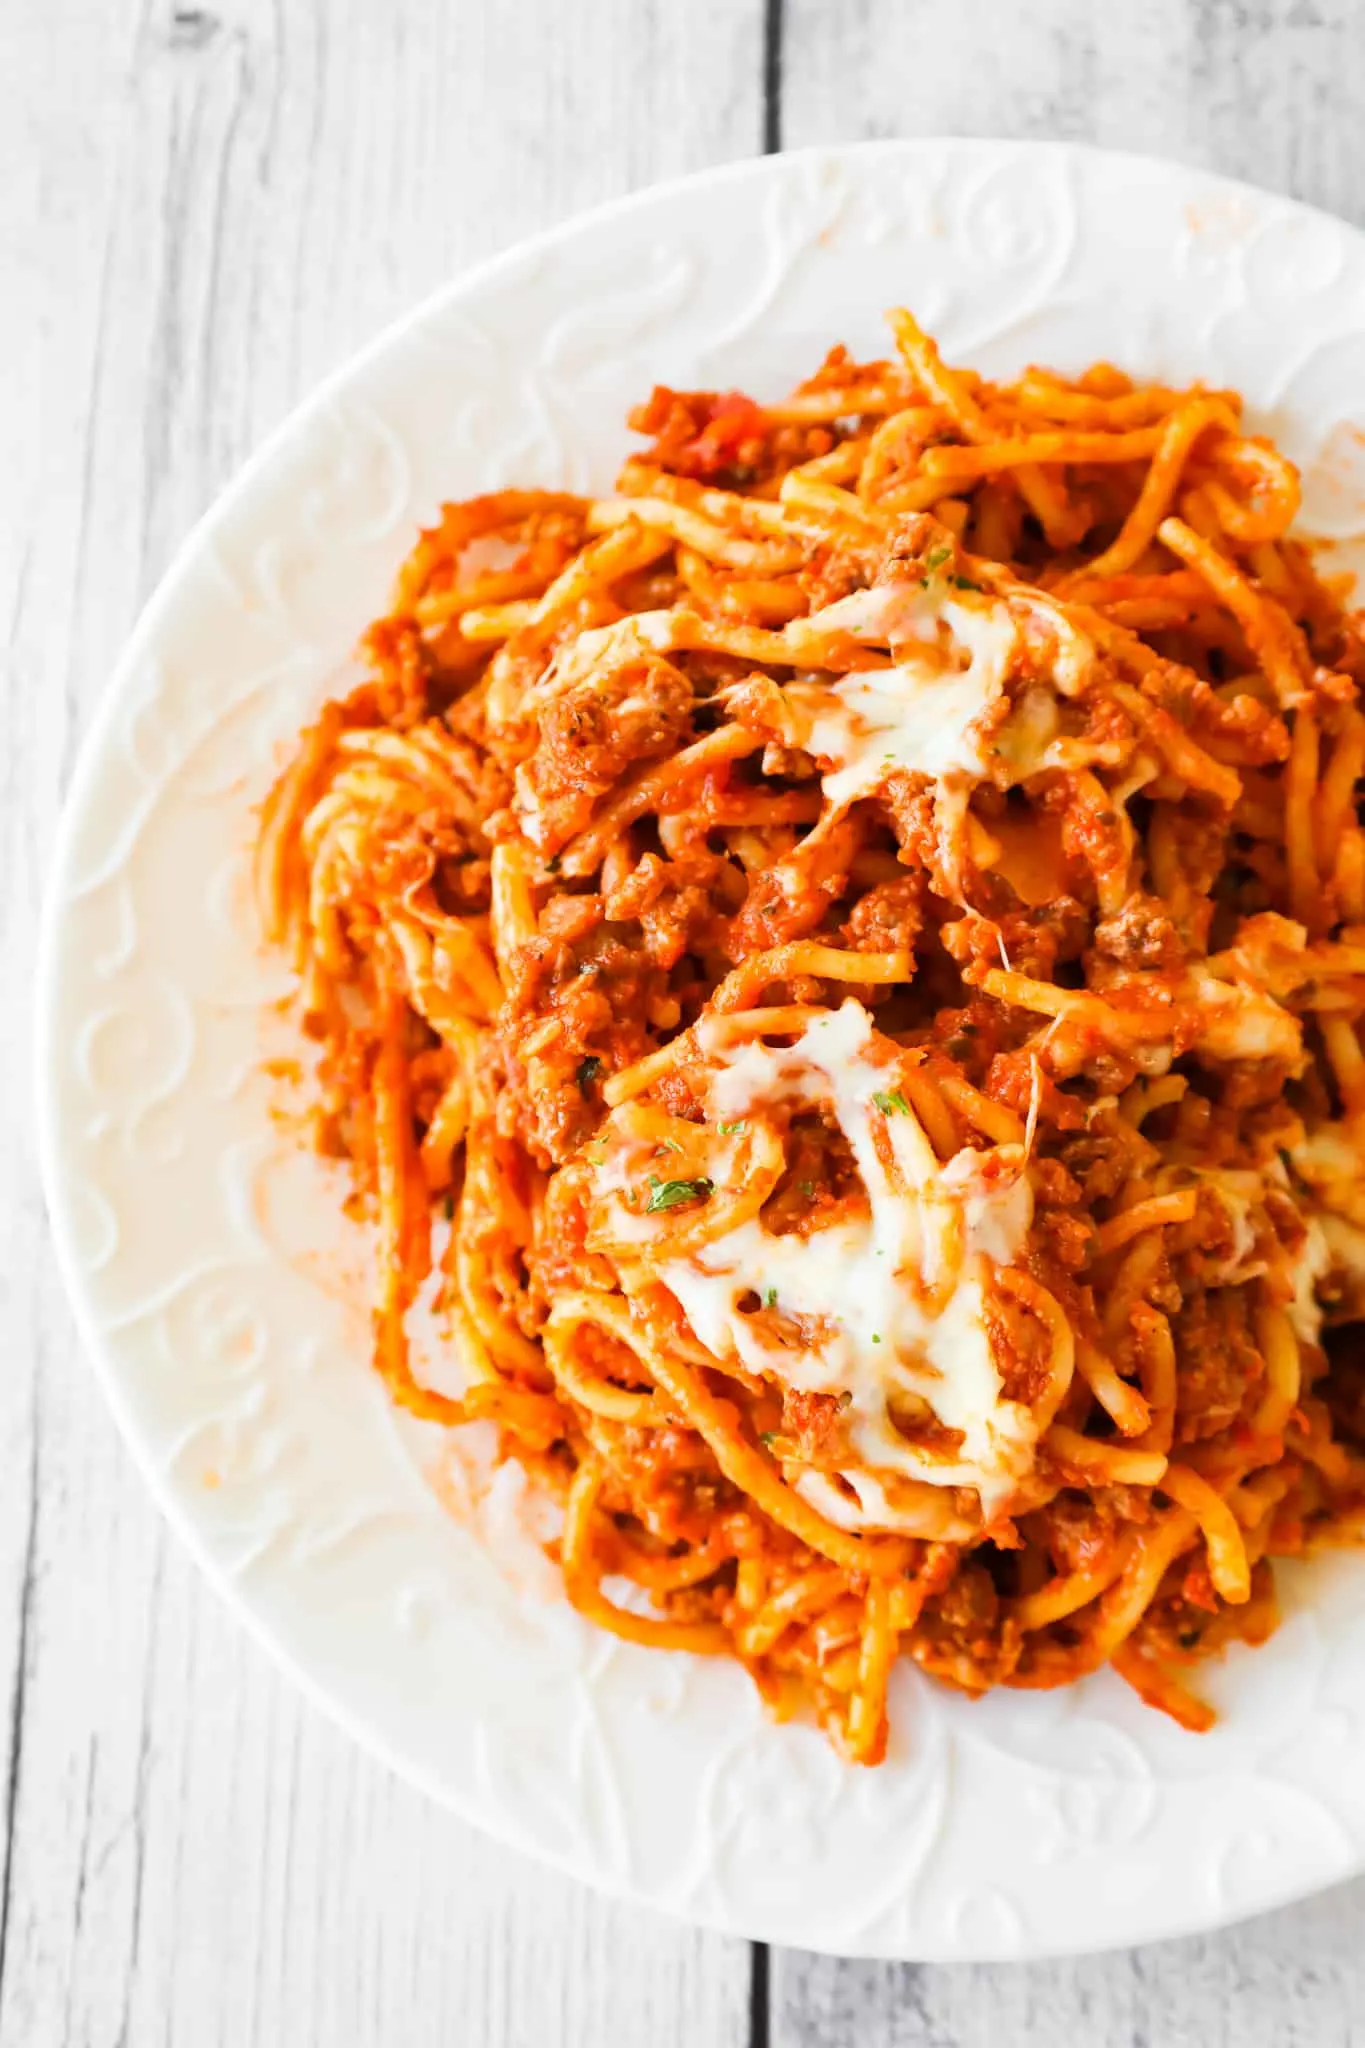 Crock Pot Spaghetti is a hearty slow cooker pasta recipe loaded with ground beef, marinara sauce and cheese.